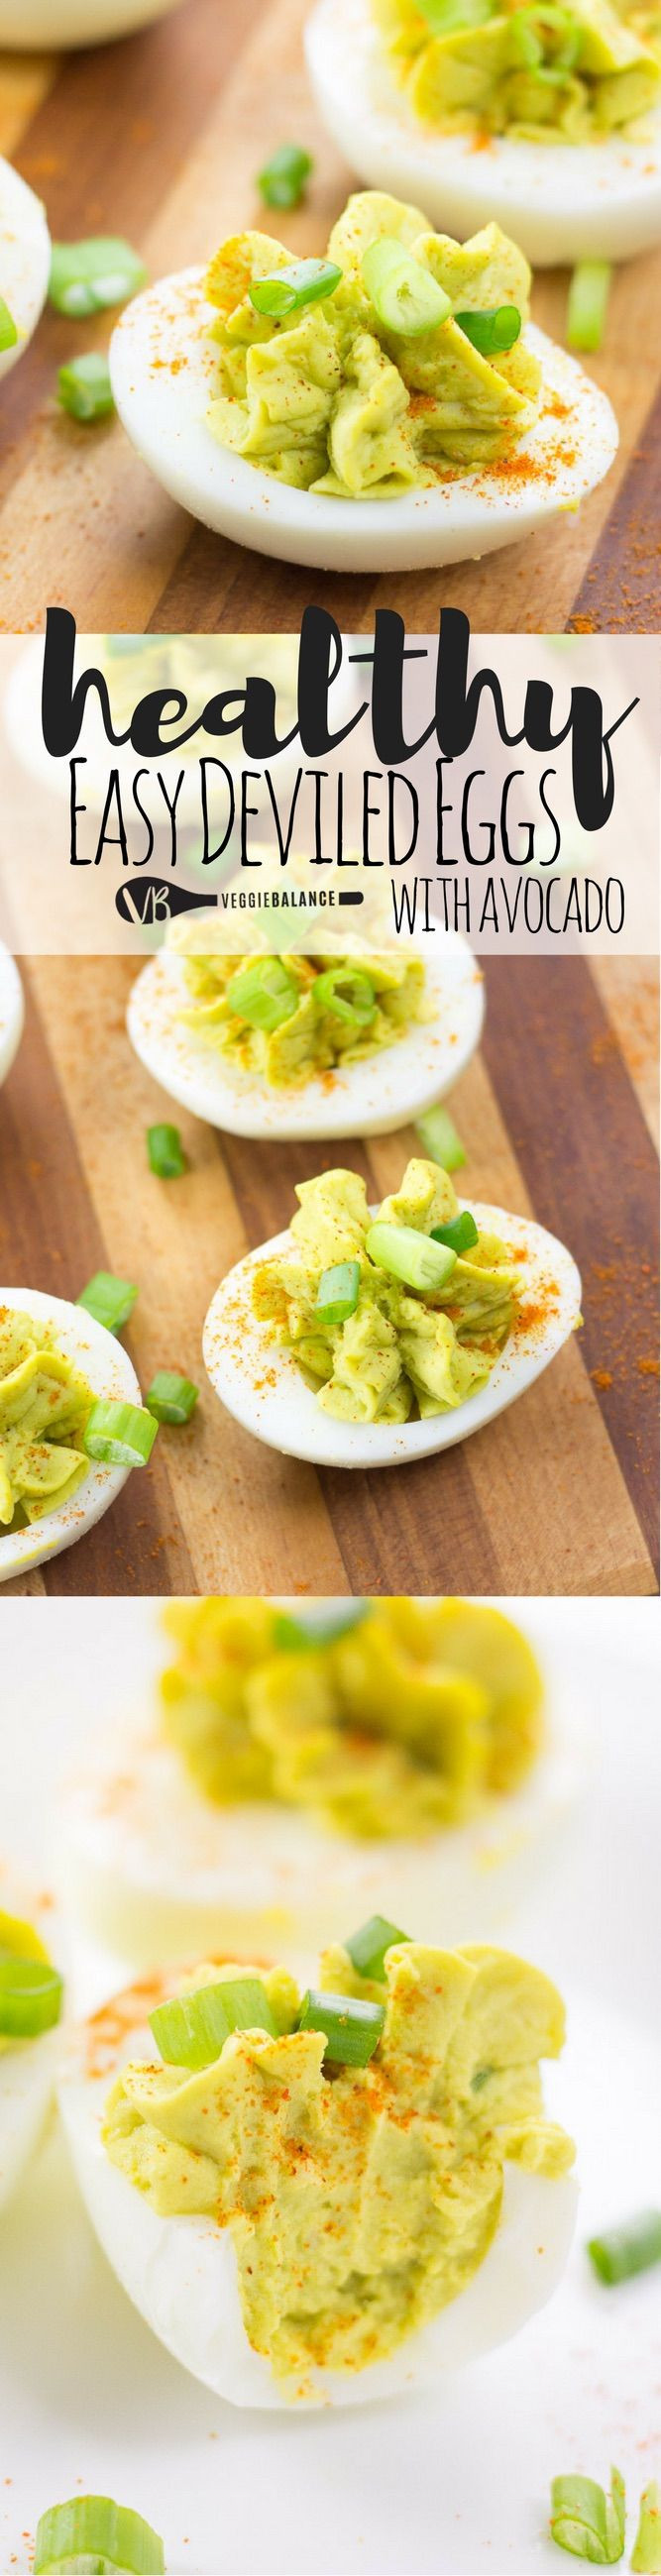 Are Deviled Eggs Healthy
 25 best ideas about Healthy deviled eggs on Pinterest